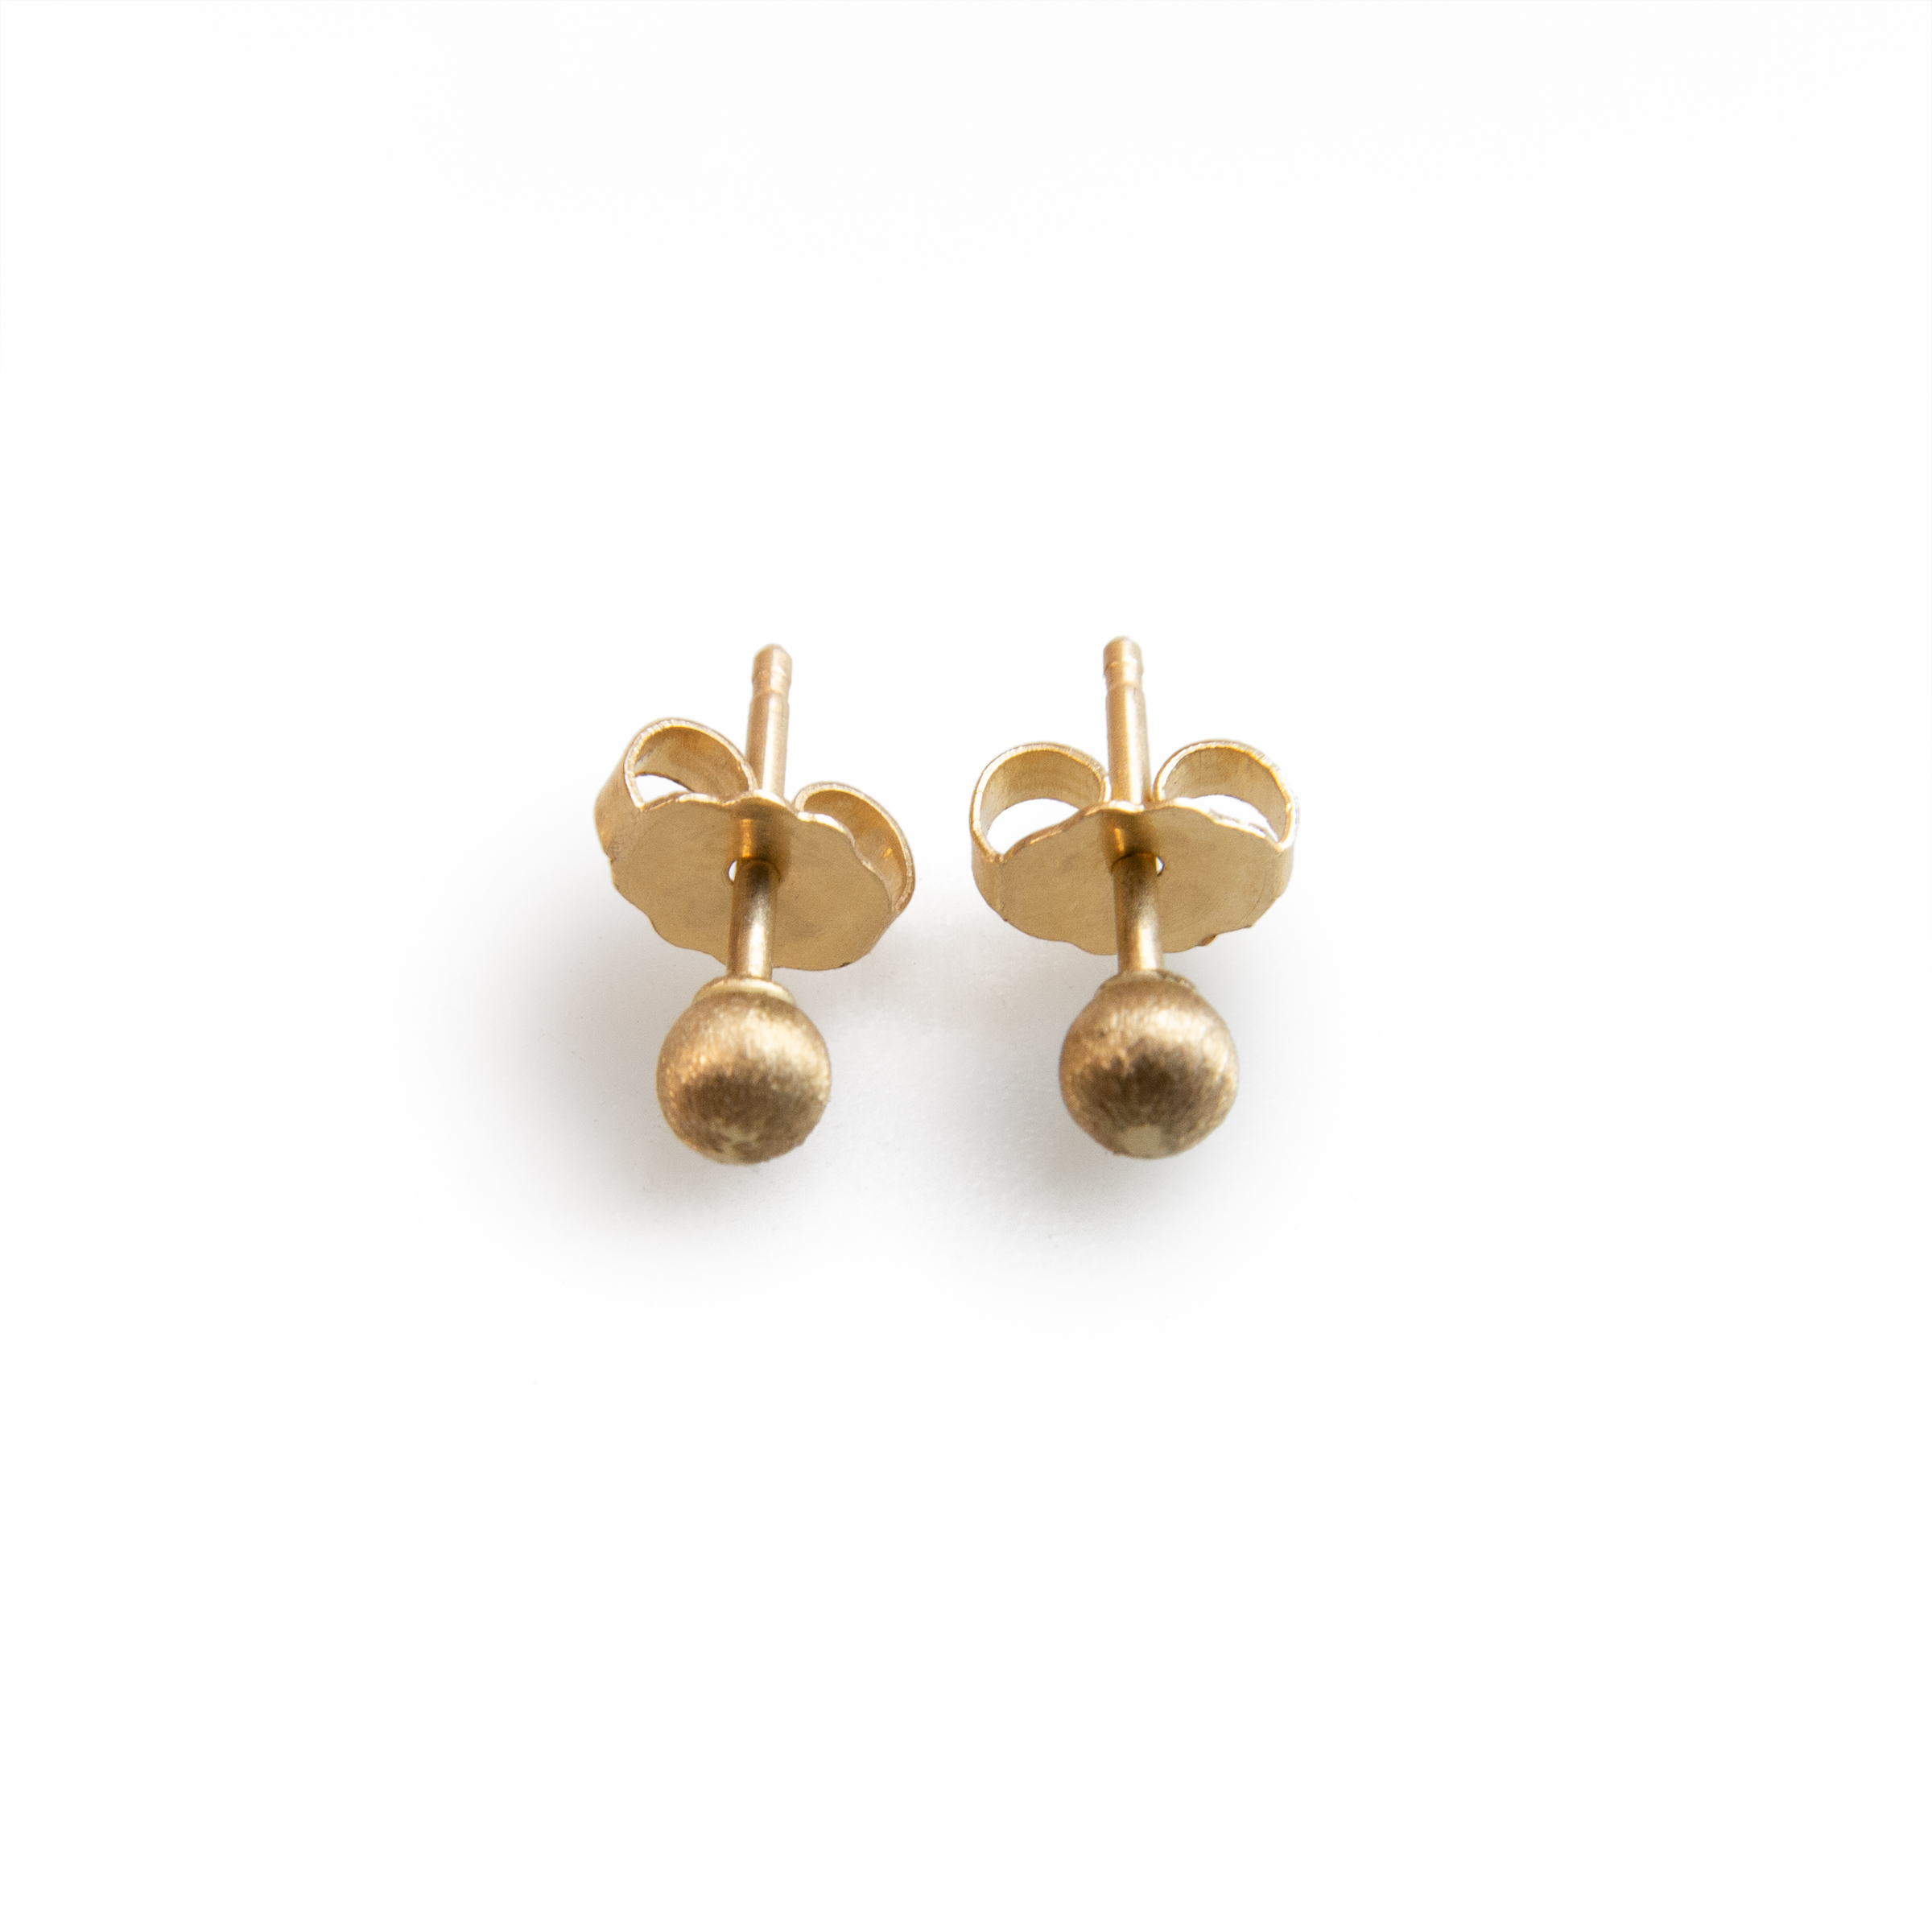 36 x Pairs Of 14k Yellow Gold Stud Earrings